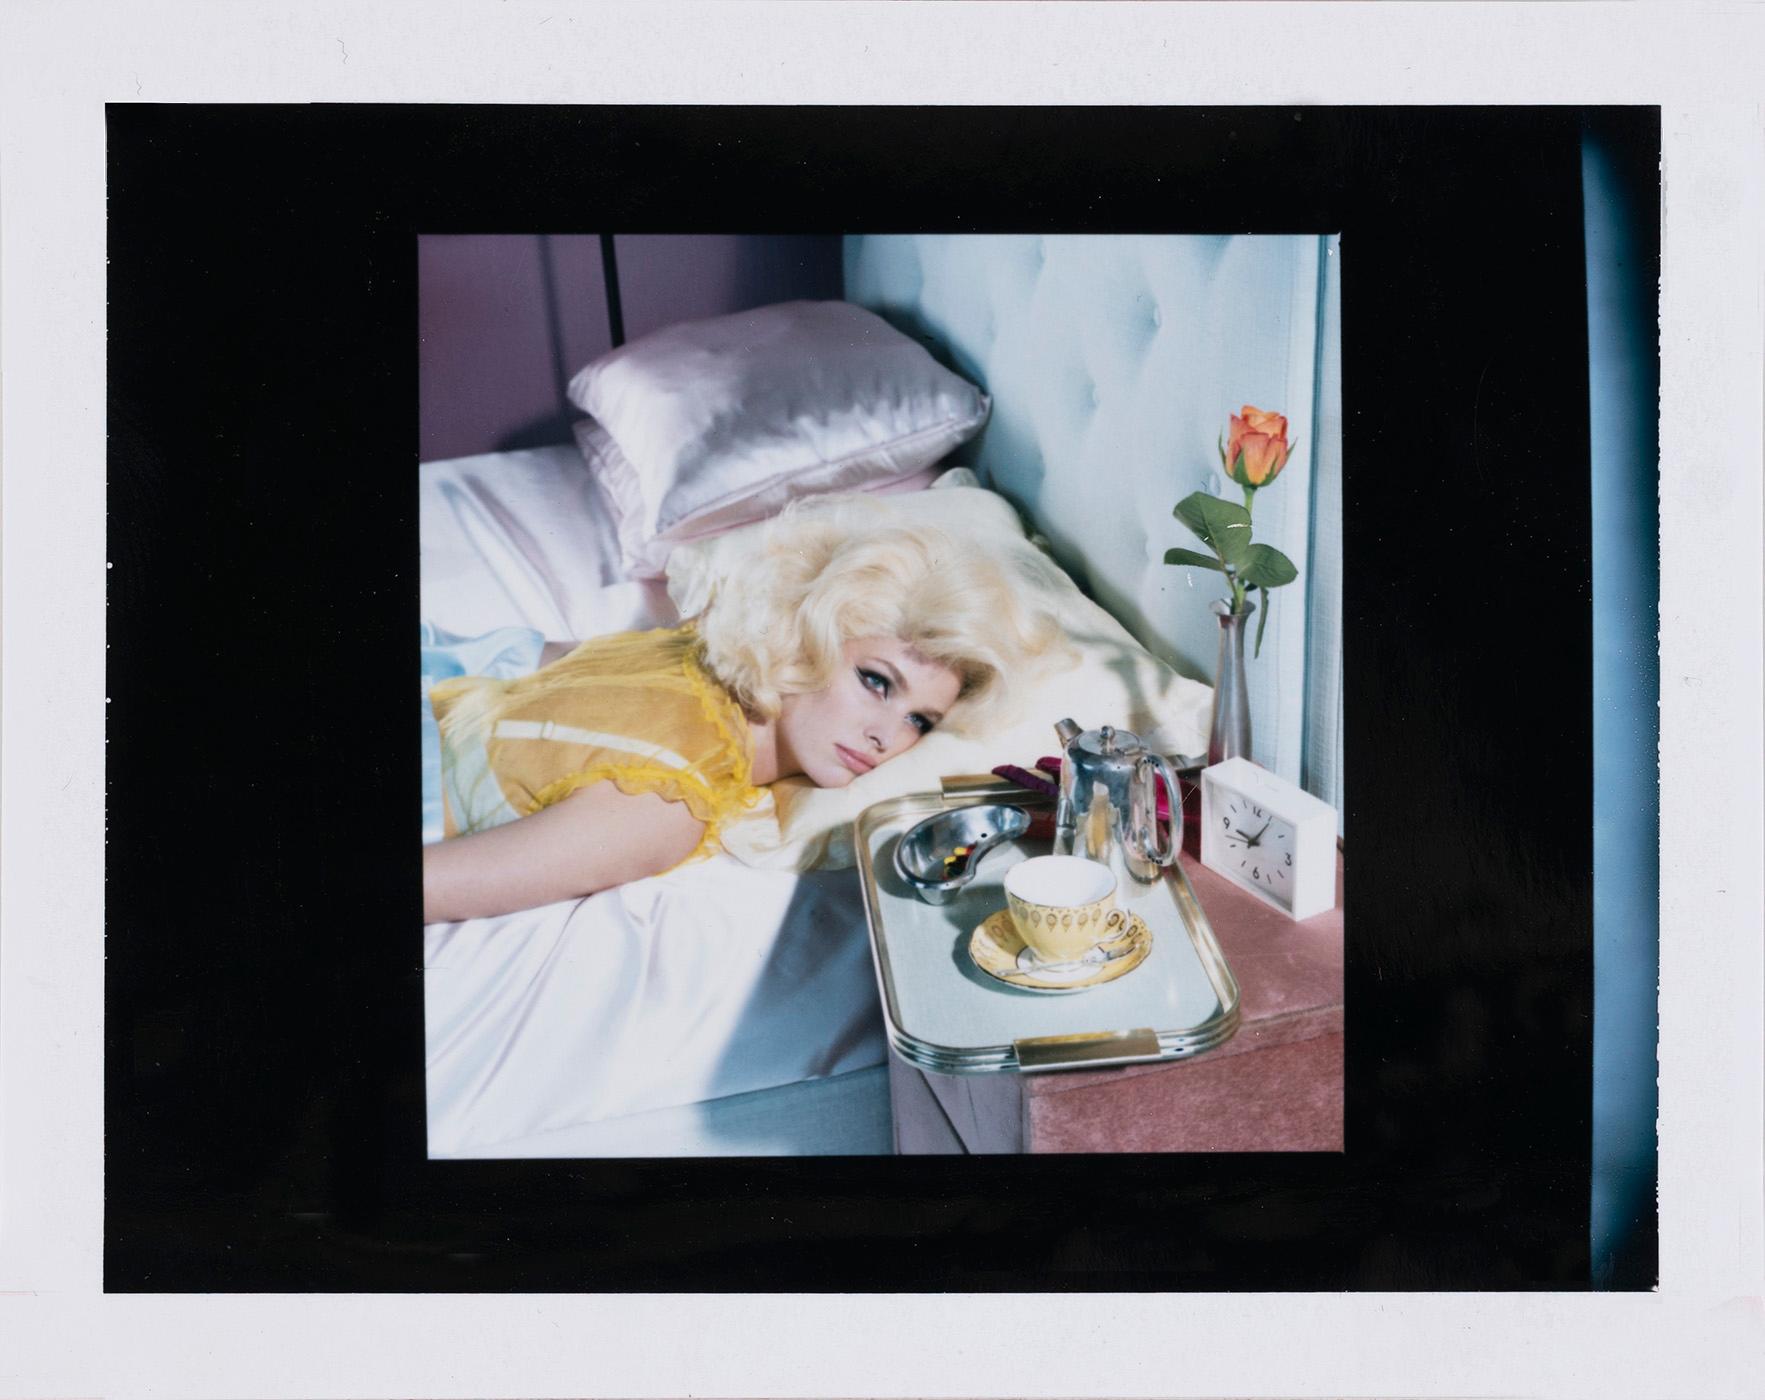 New Utopias - study XVIII 2018 - Miles Aldridge (Colour Photography)
Unique Polaroid print
Signed in ink on reverse
3 1/2 x 4 1/4 inches

Miles Aldridge (born 1964) is one of Britain’s most celebrated fashion photographers, who has worked for a